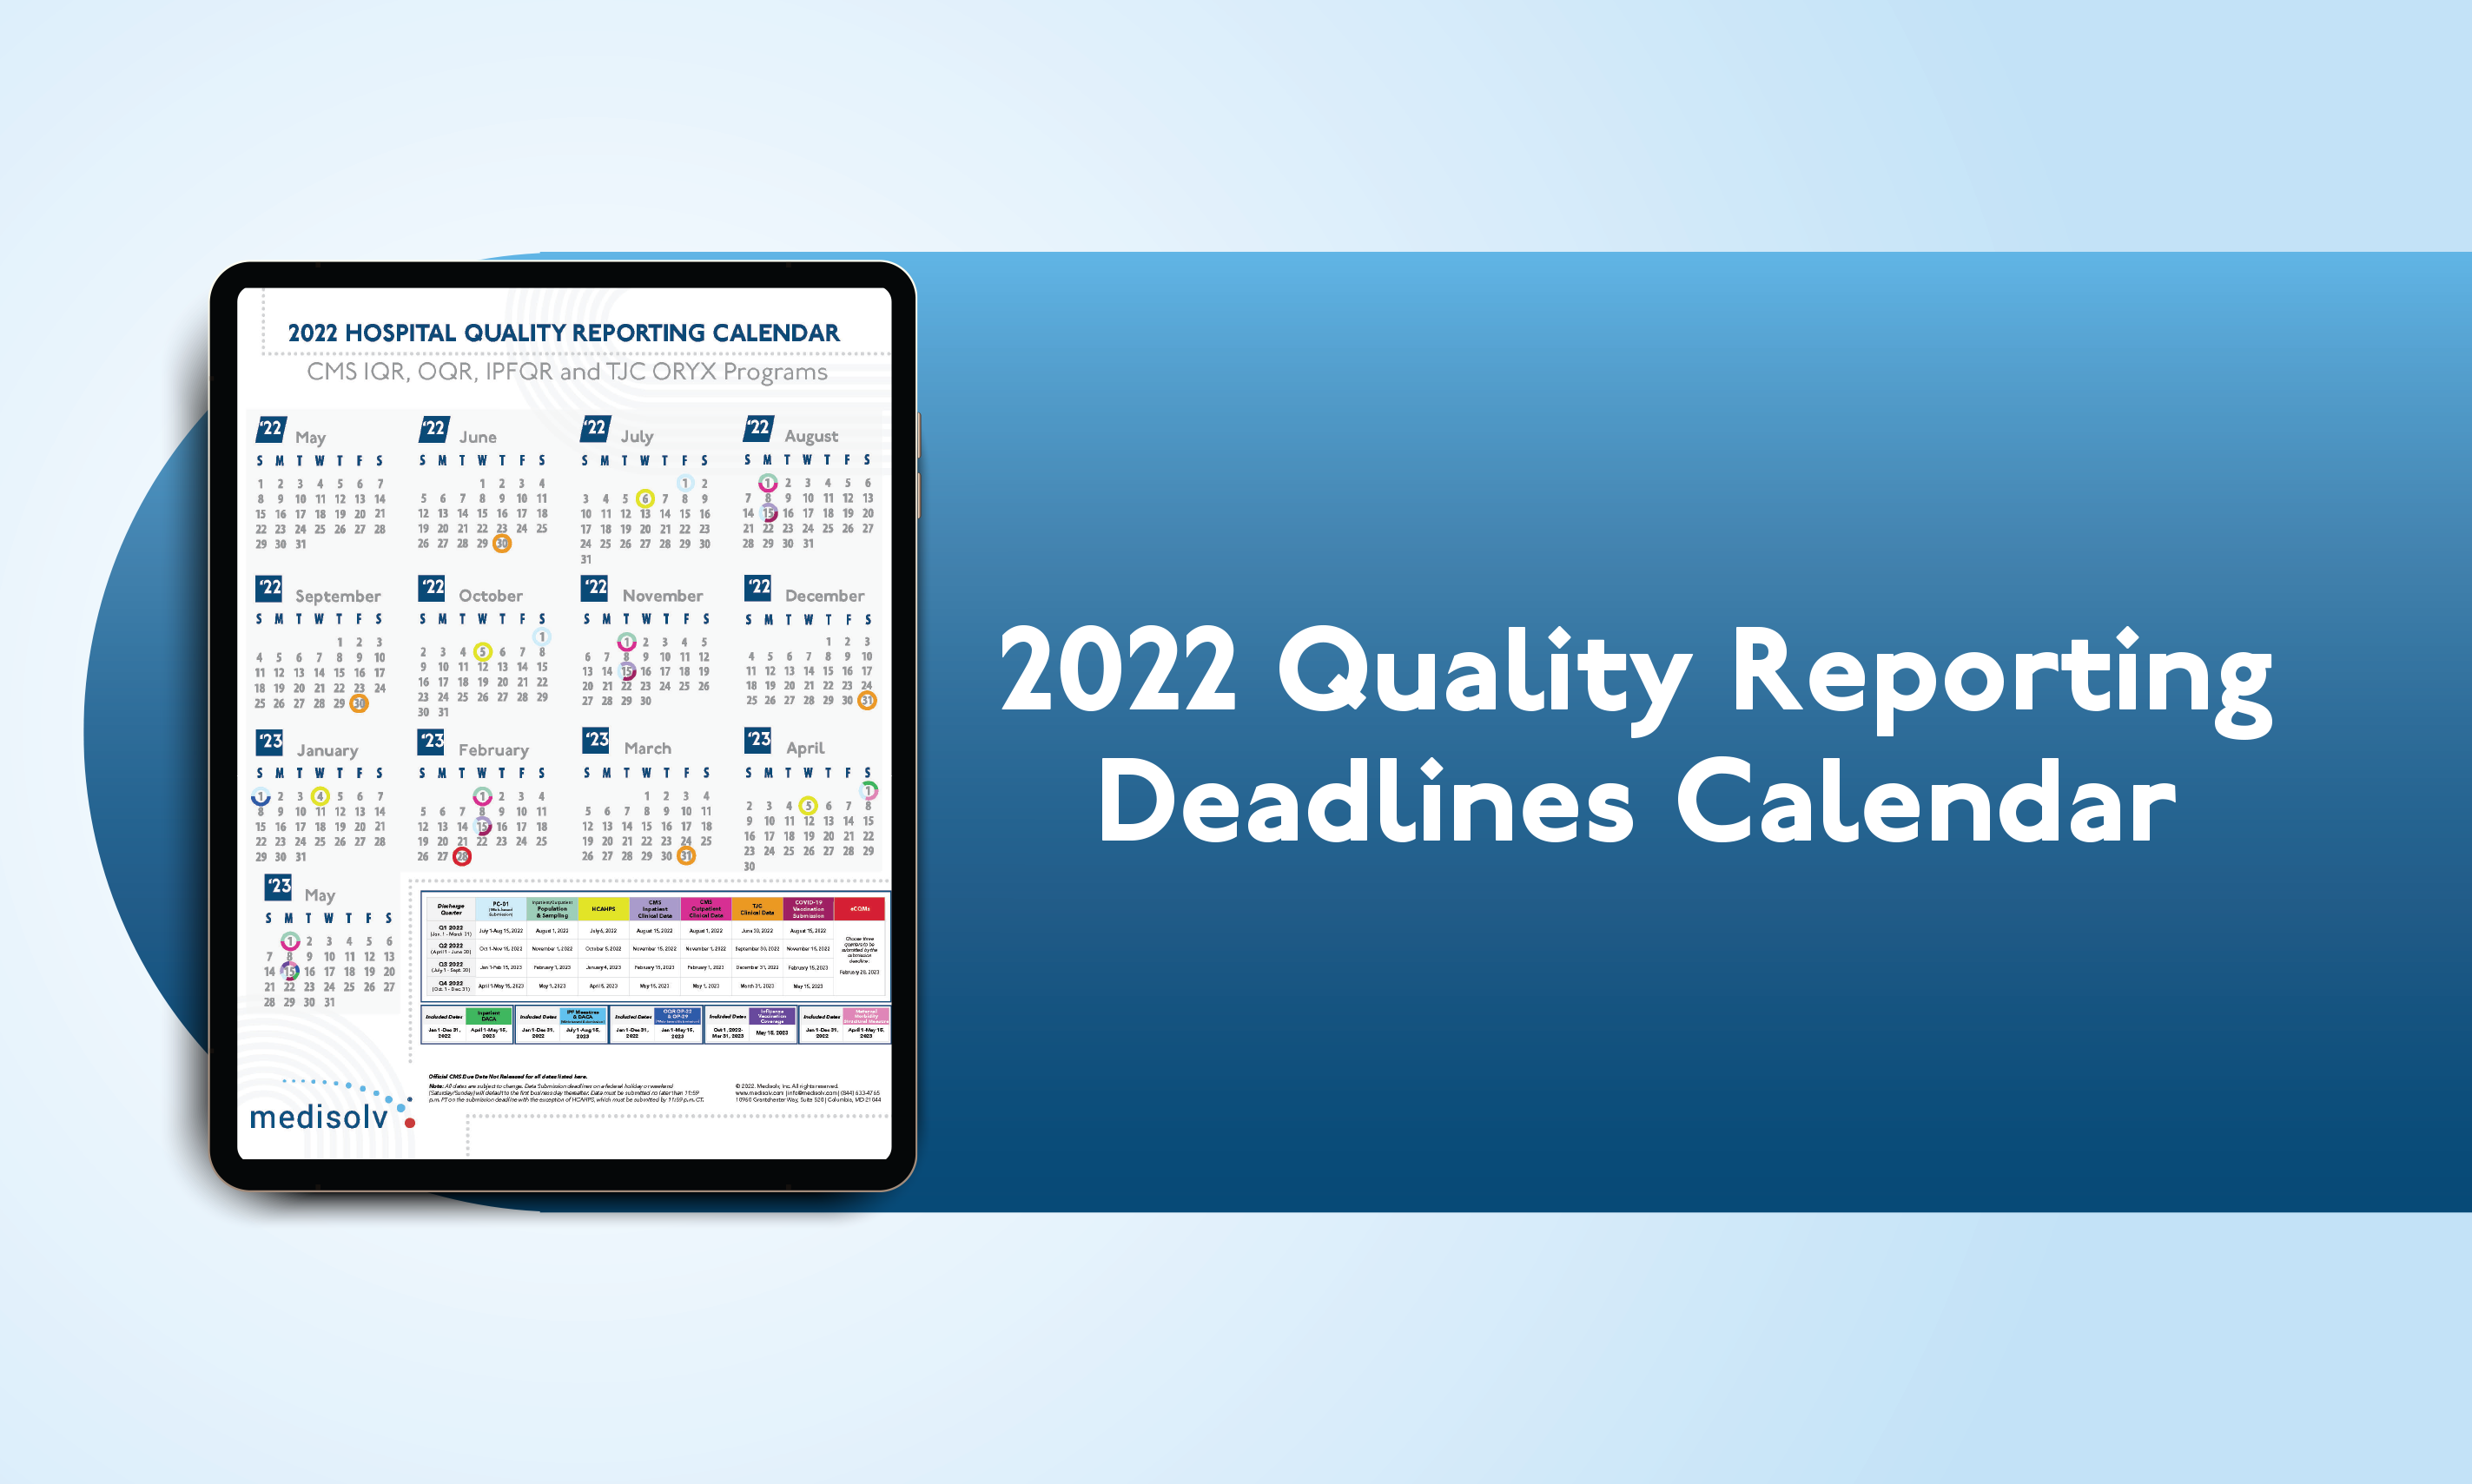 2022 Quality Reporting Dates and Deadlines Calendar